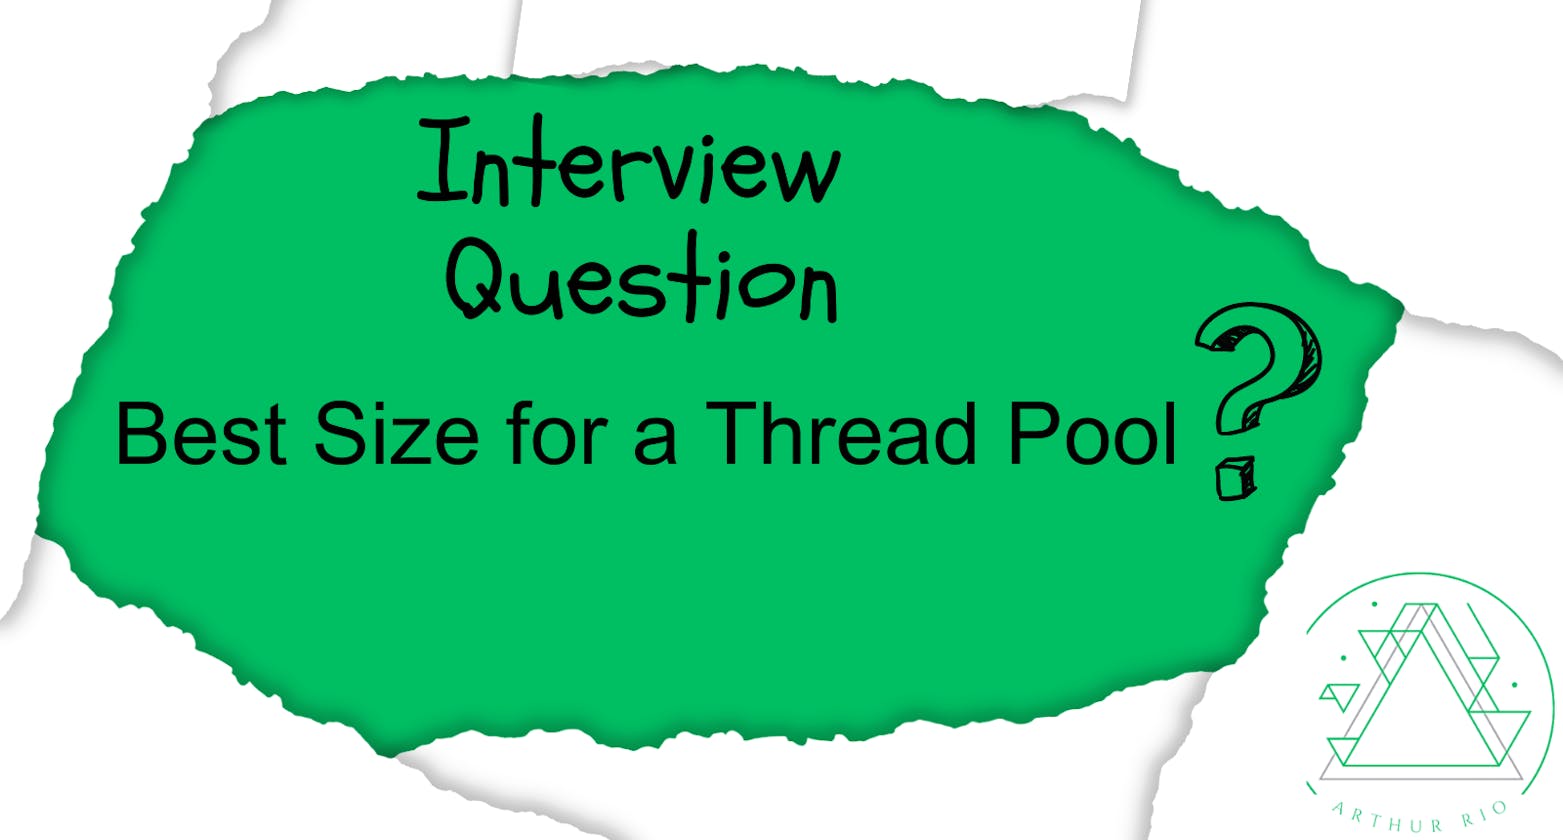 Interview Question: Best Size for a Thread Pool?